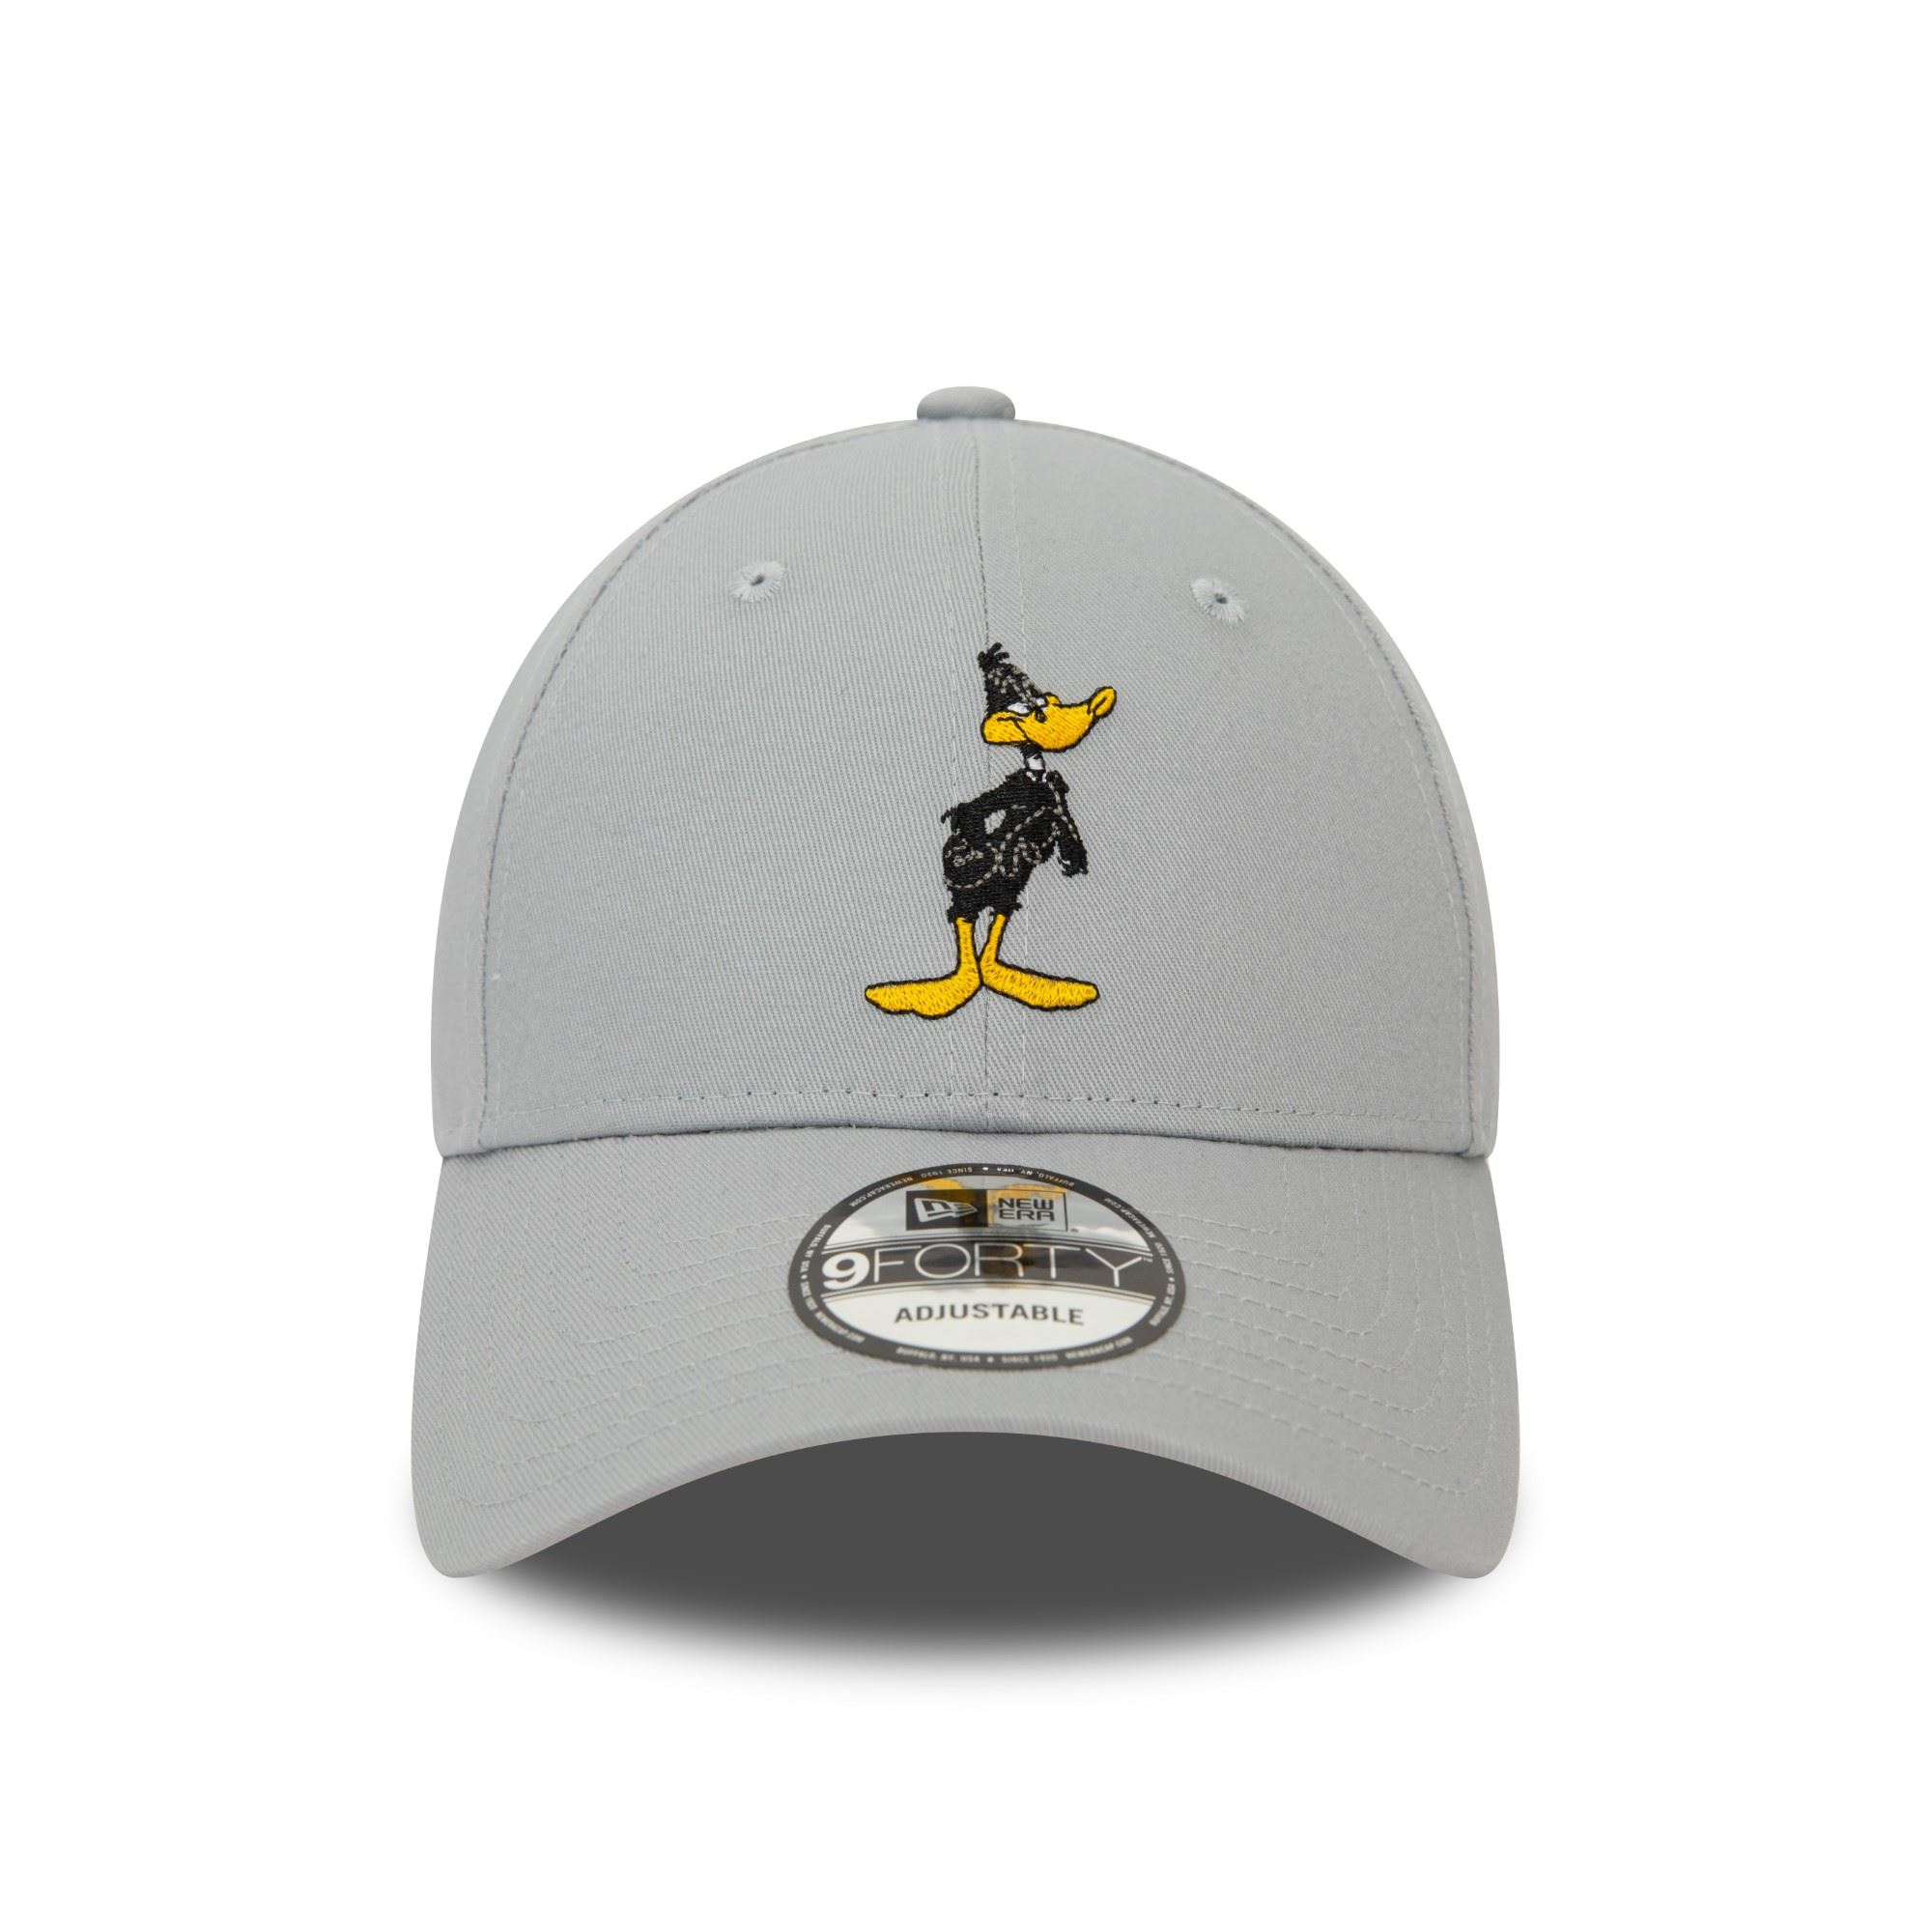 Daffy Duck Looney Tunes Character Grey 9Forty Adjustable Cap New Era